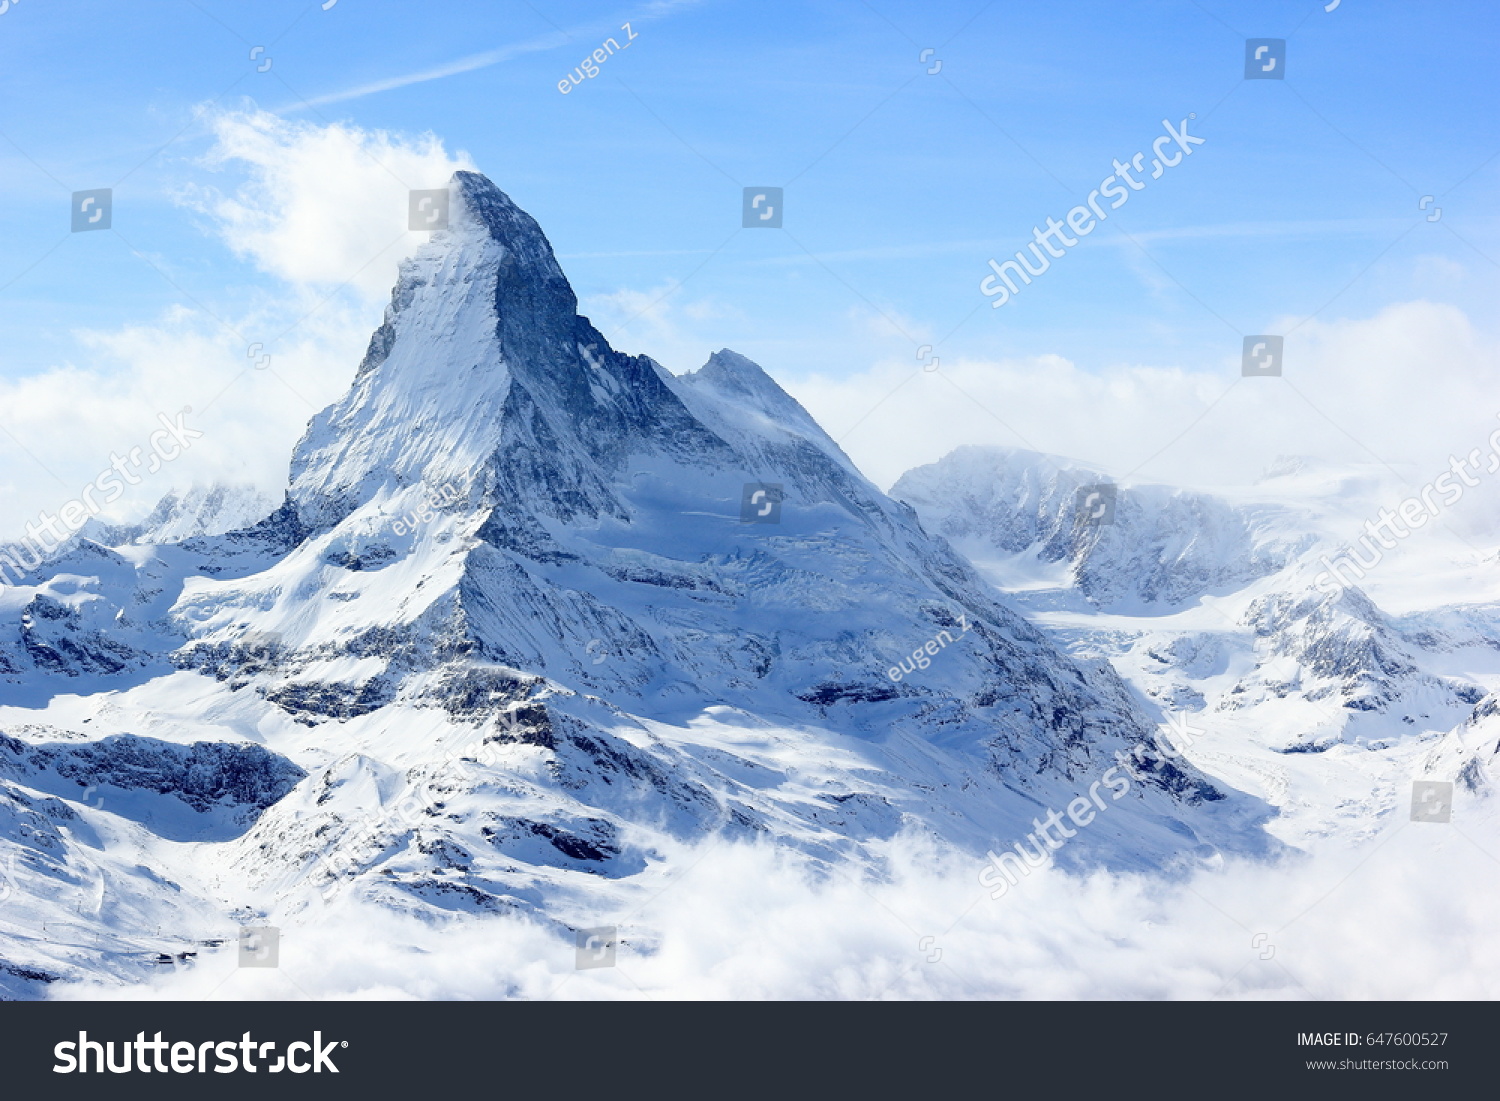 View of the Matterhorn from the Rothorn summit station. Swiss Alps, Valais, Switzerland. #647600527